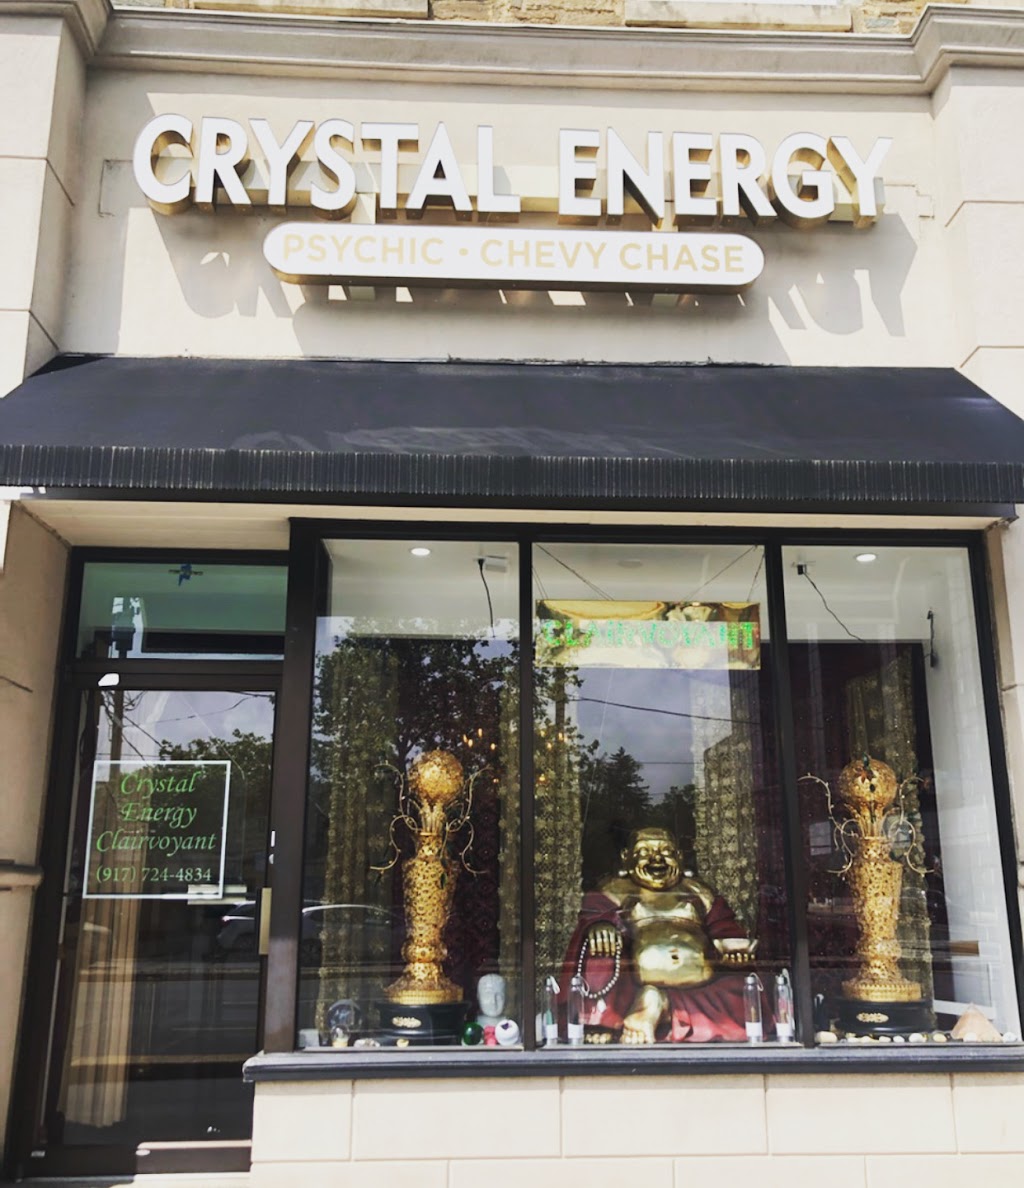 Psychic Chevy Chase | 7631 Connecticut Ave, Chevy Chase, MD 20815, USA | Phone: (917) 724-4834